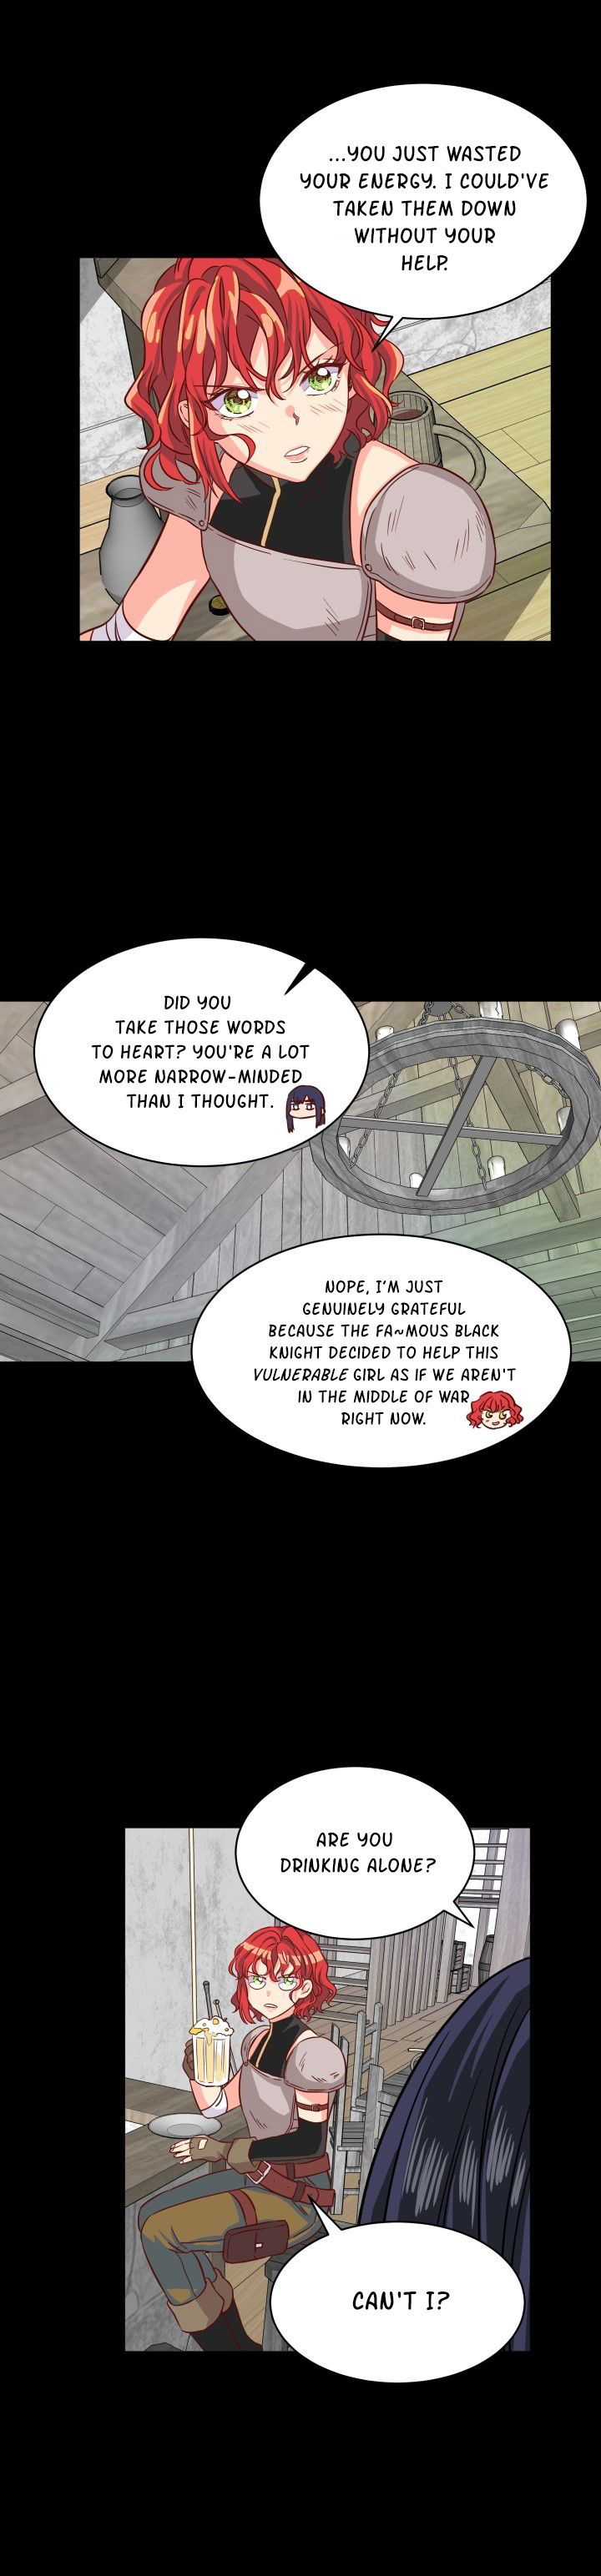 Priscilla's Marriage Request Chapter 5 page 13